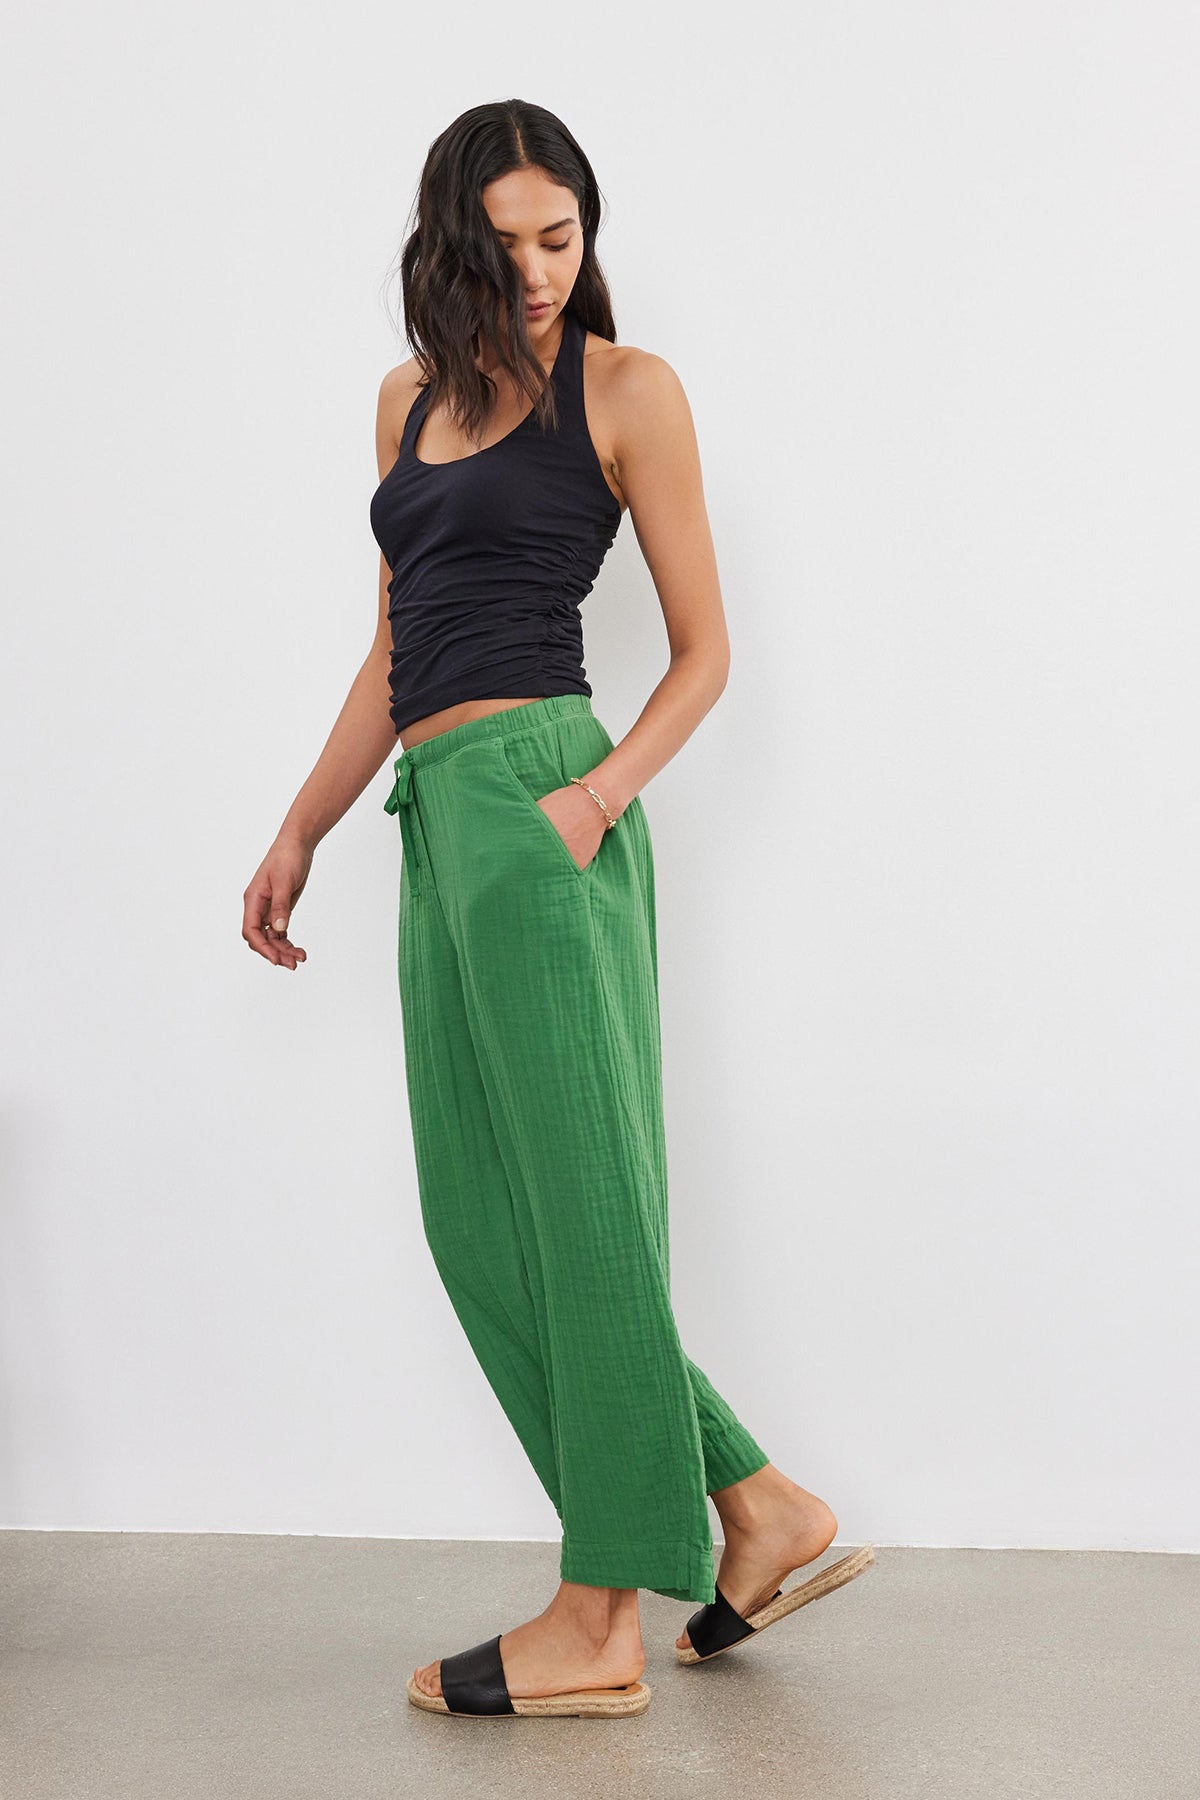 A woman in a black tank top and Velvet by Graham & Spencer Franny Cotton Gauze Pants with relaxed legs stands against a plain background, her hand resting on her hip.-36917078425793